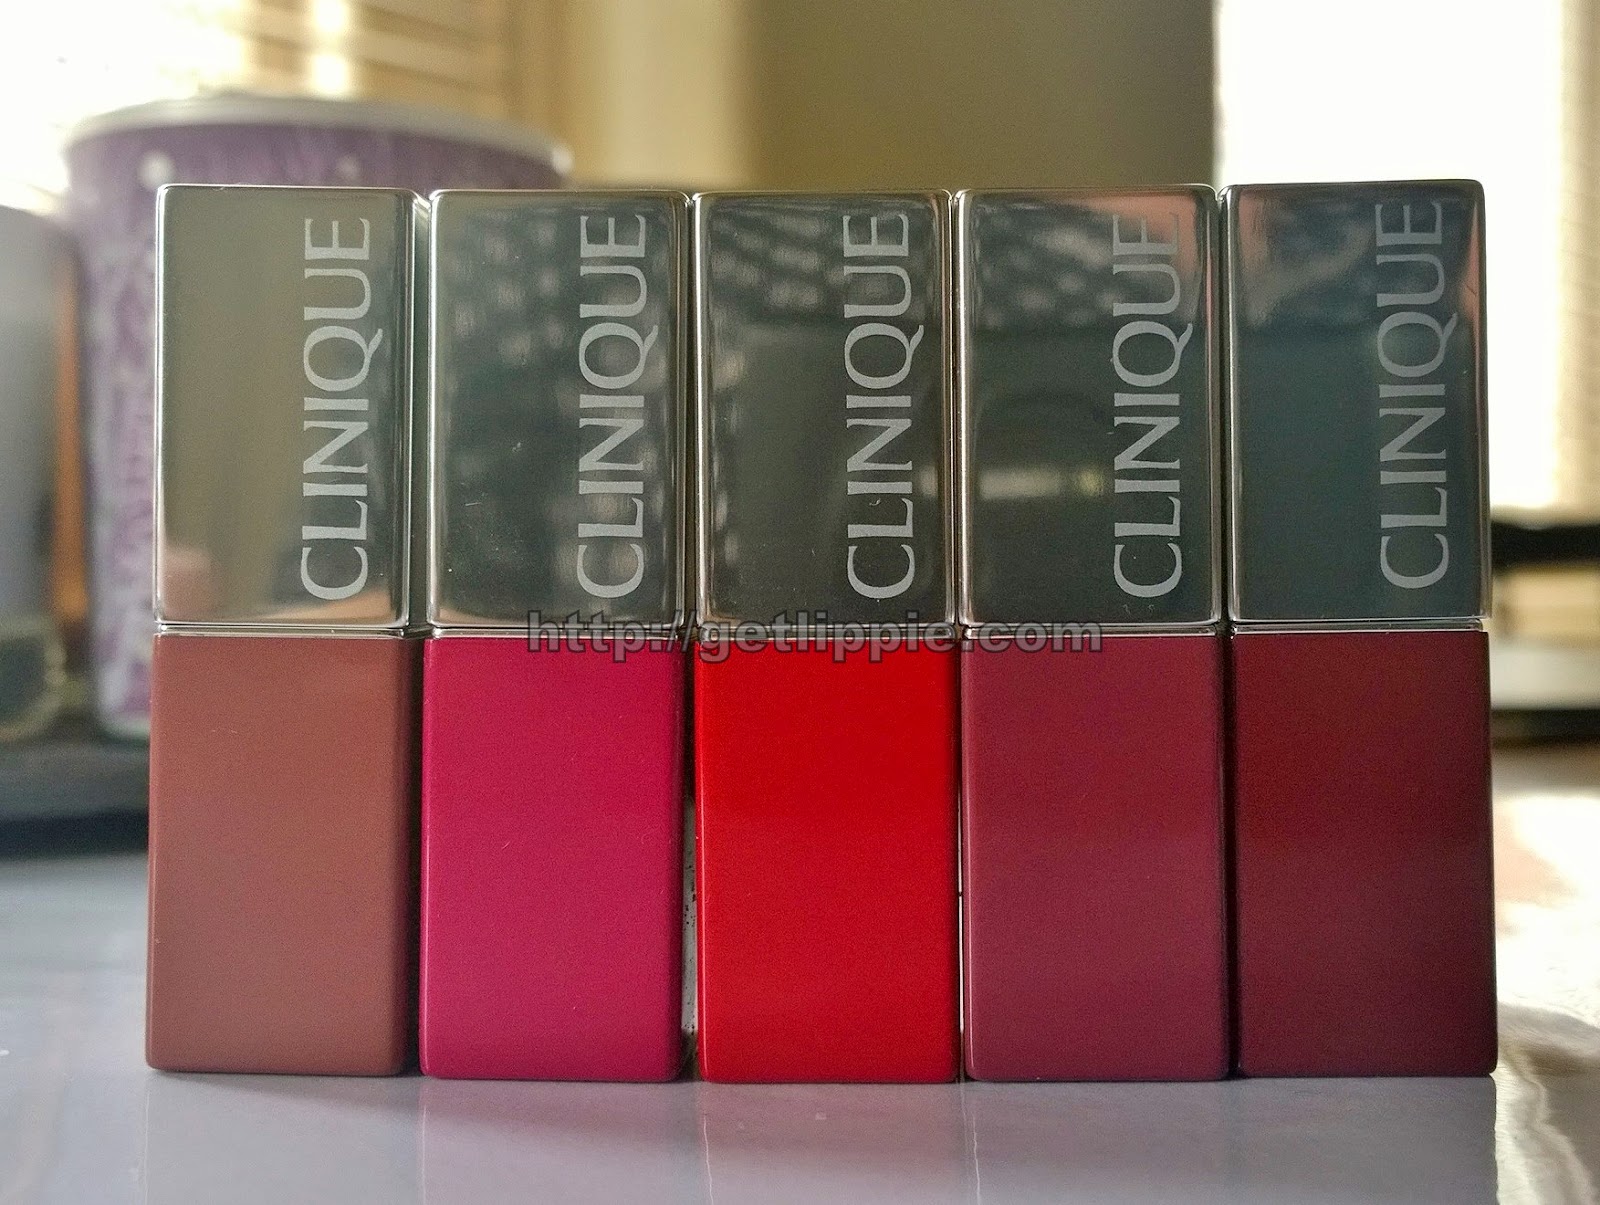 Clinique Colour Pop Lipsticks in Bare/Punch/Cherry/Love and Berry Pop